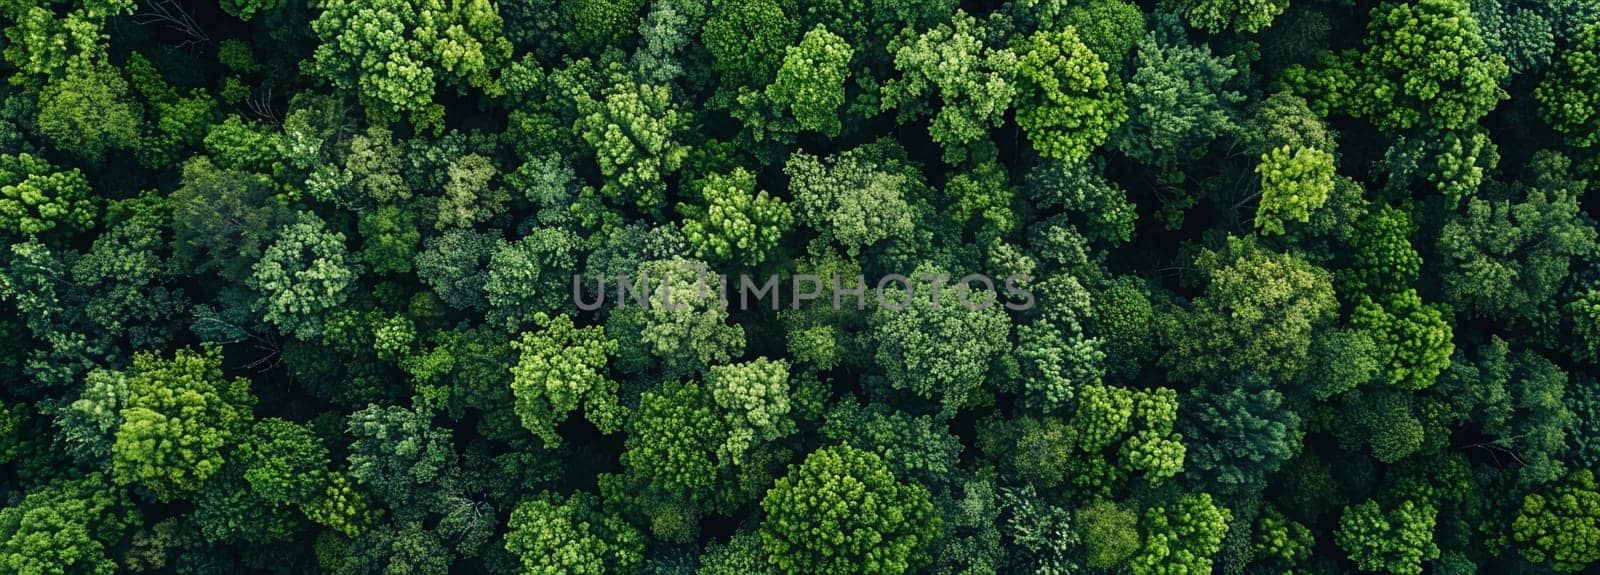 Lush green canopy of vibrant forest in summer captured from above showcases nature's tranquility and the beauty of the ecosystem.